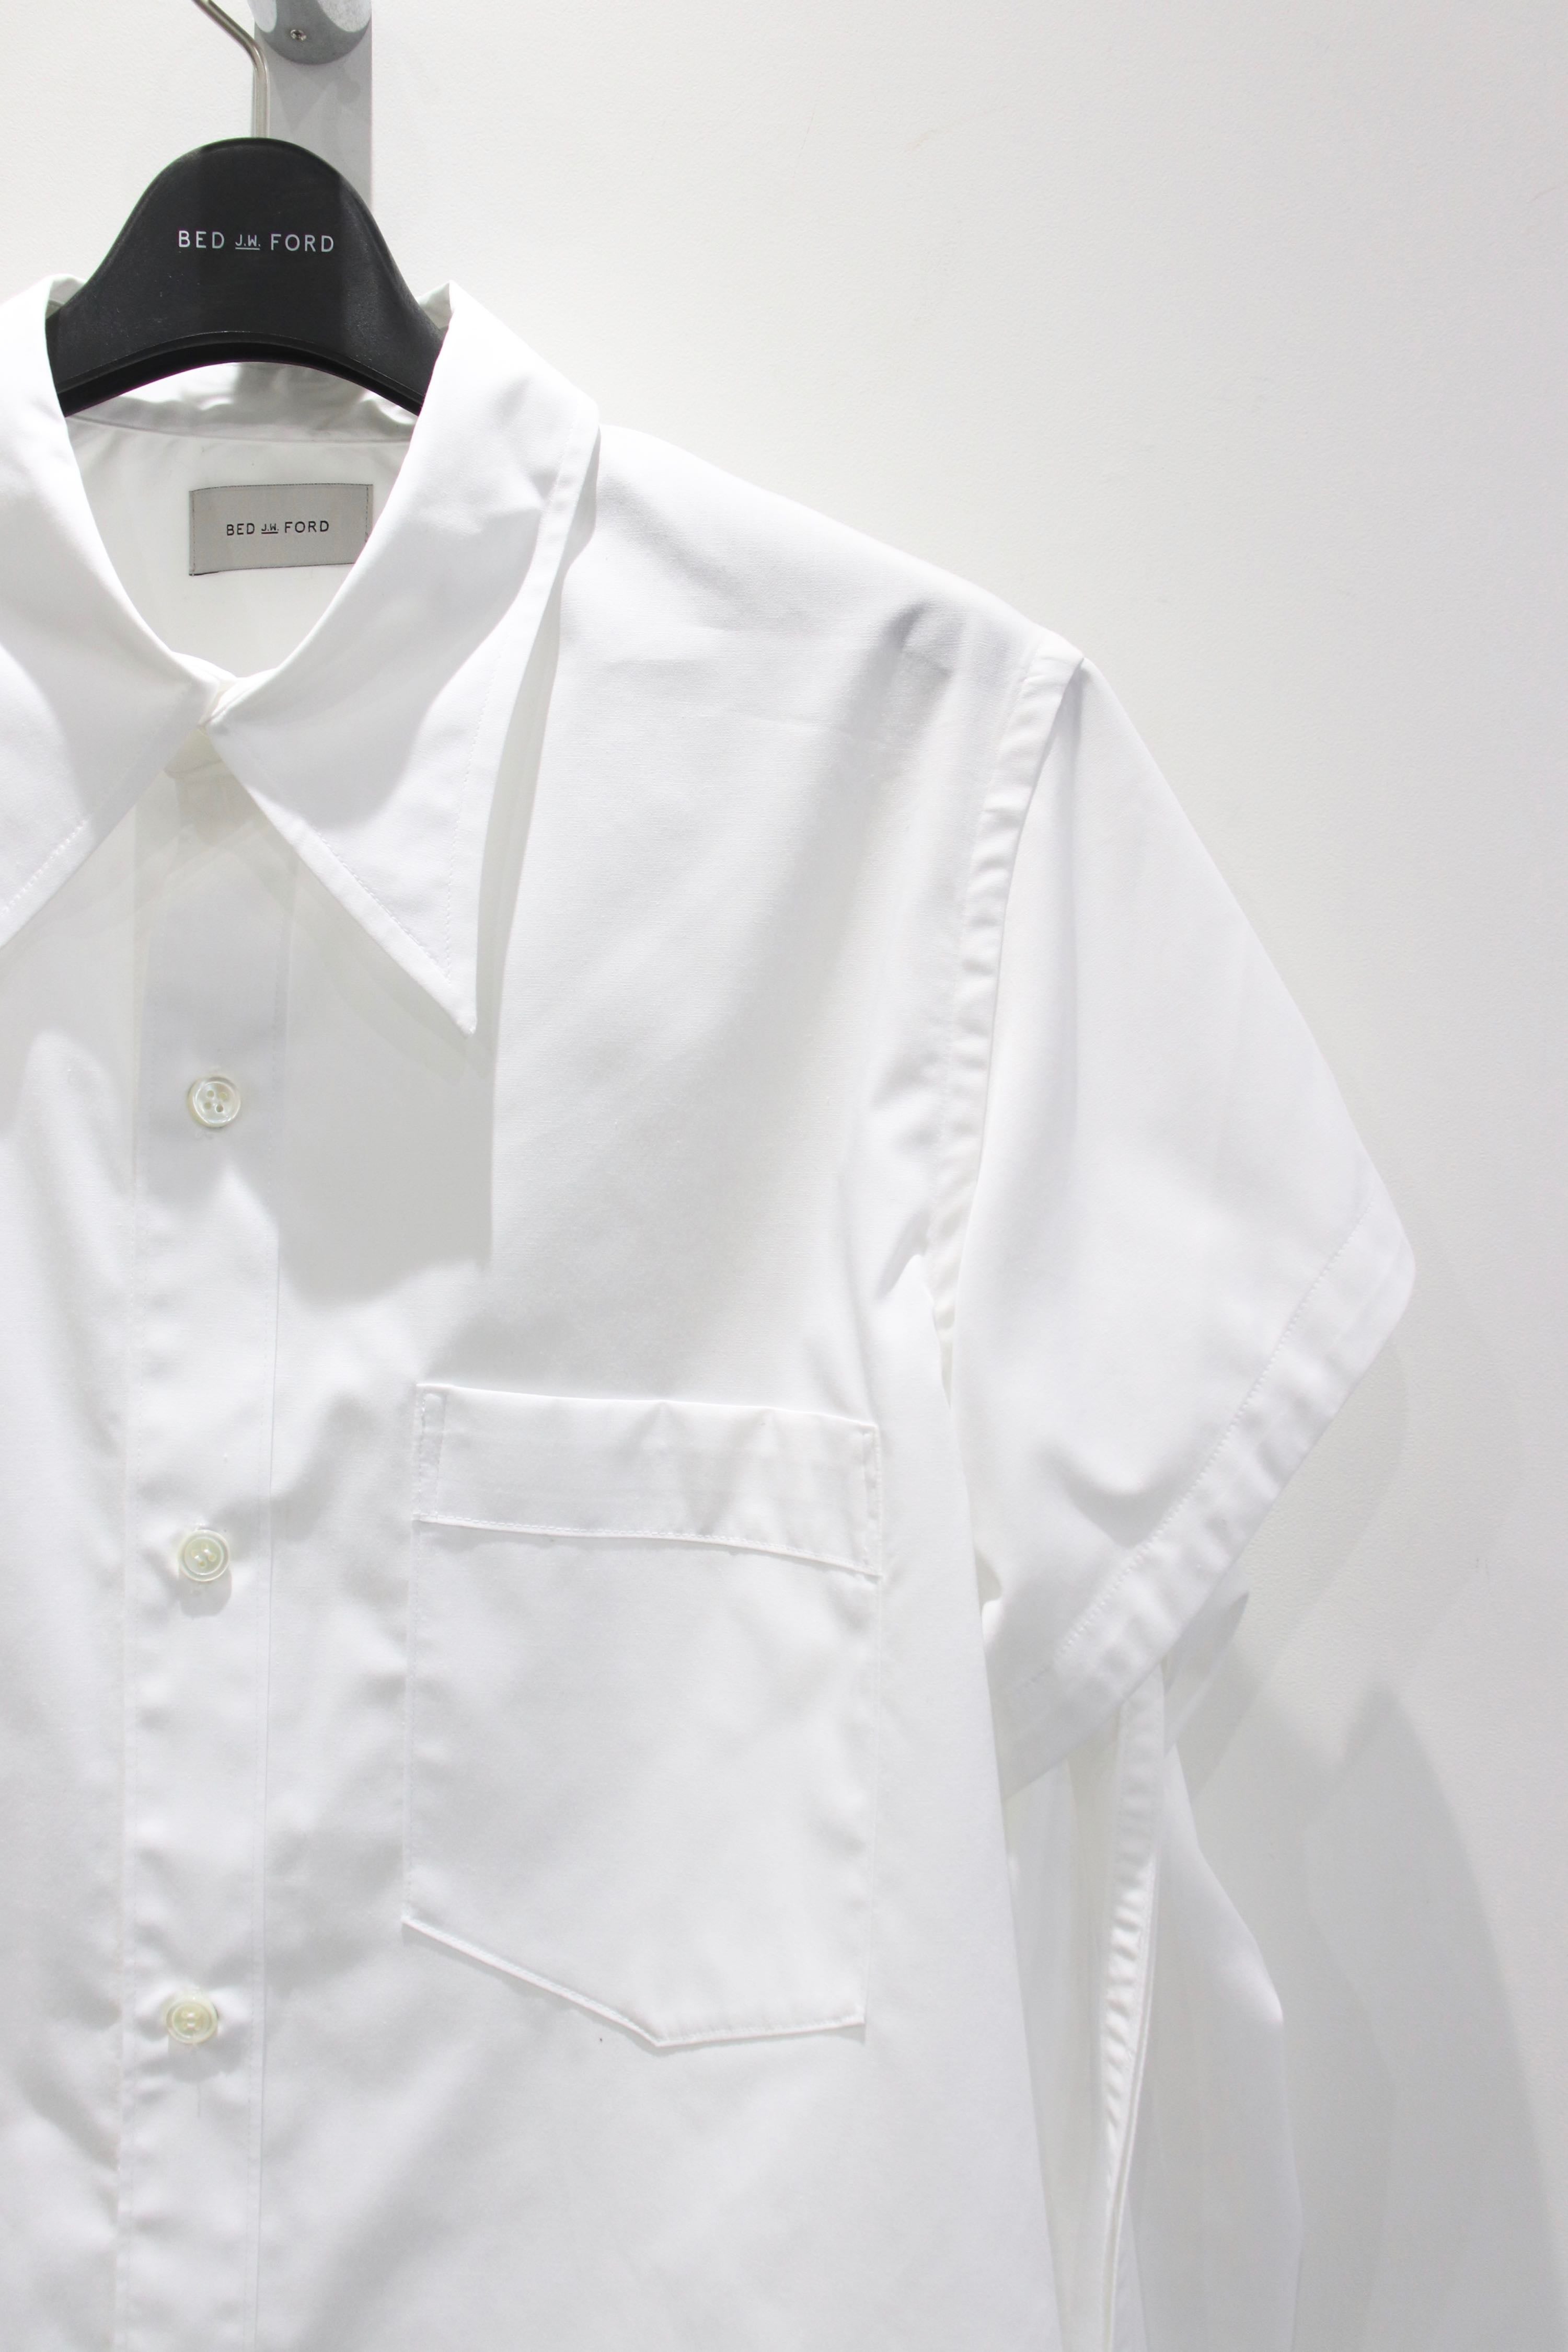 Bed J.W. FORD (Bedford) Double-Sleeve Shirts White Mail Order